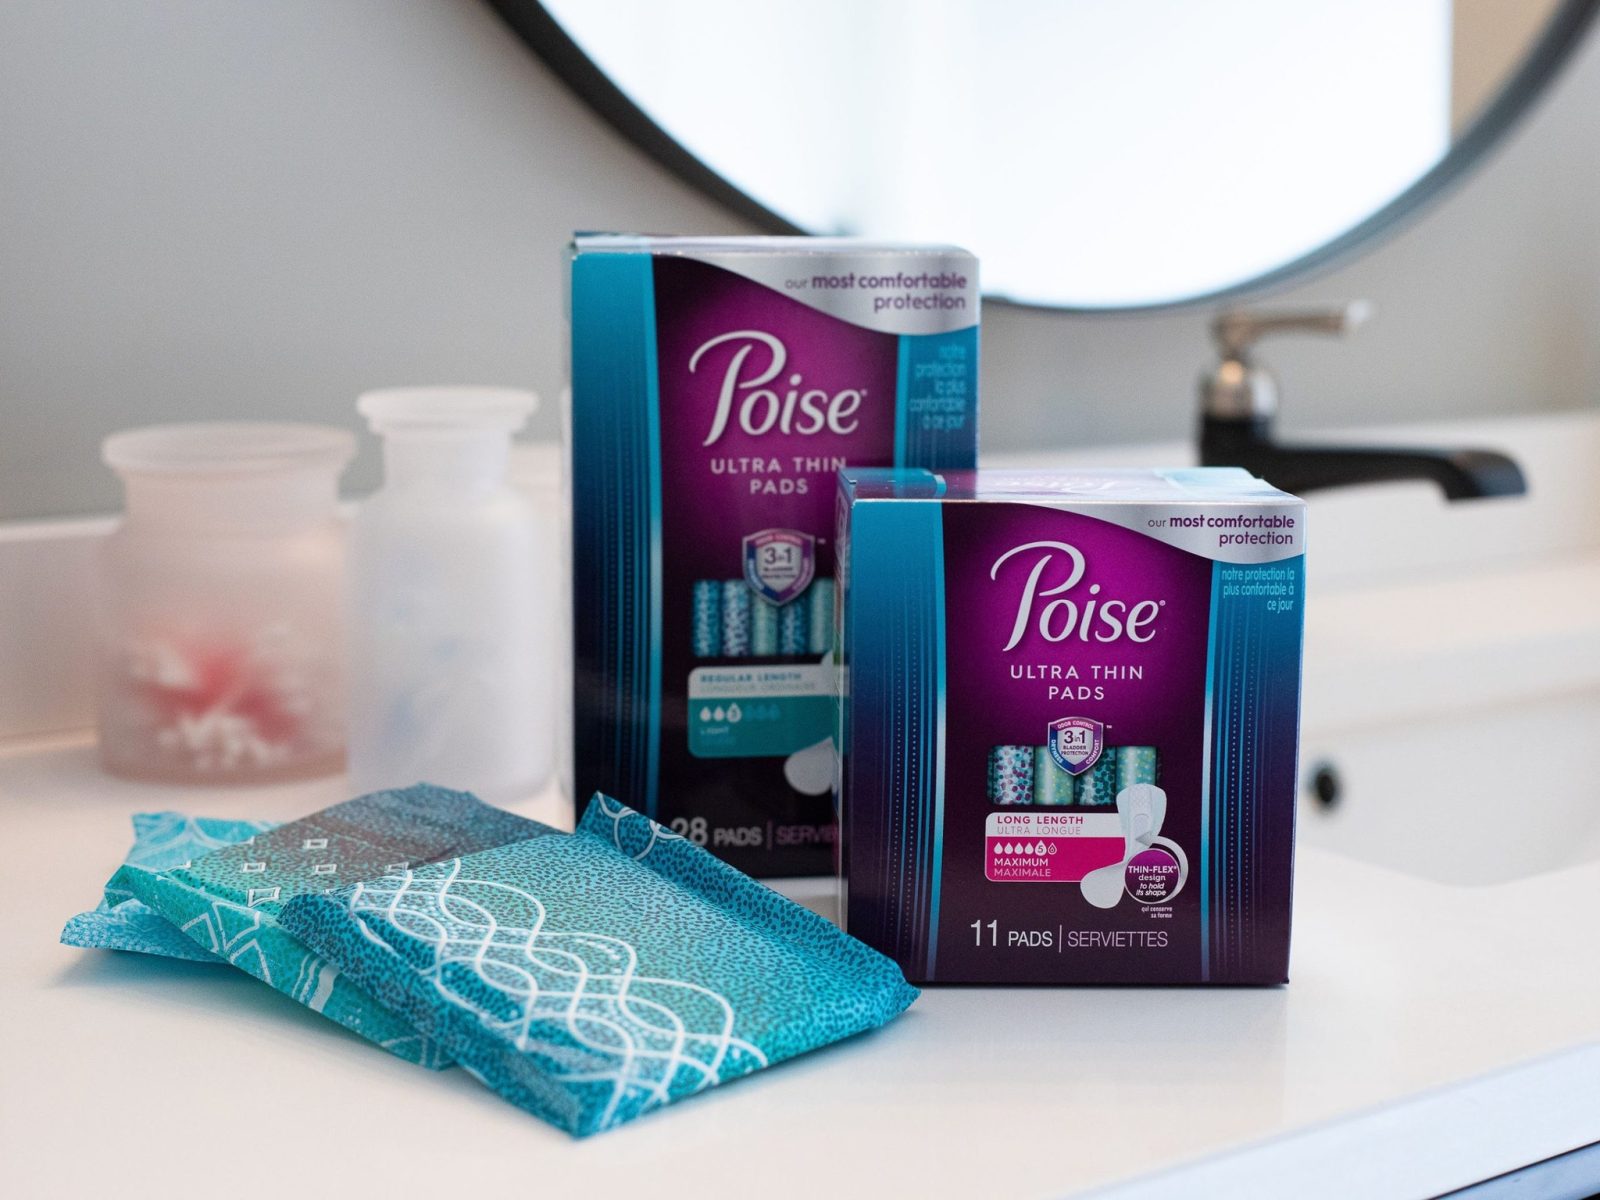 Poise Ultra Thin Pads As Low As $1.49 At Kroger